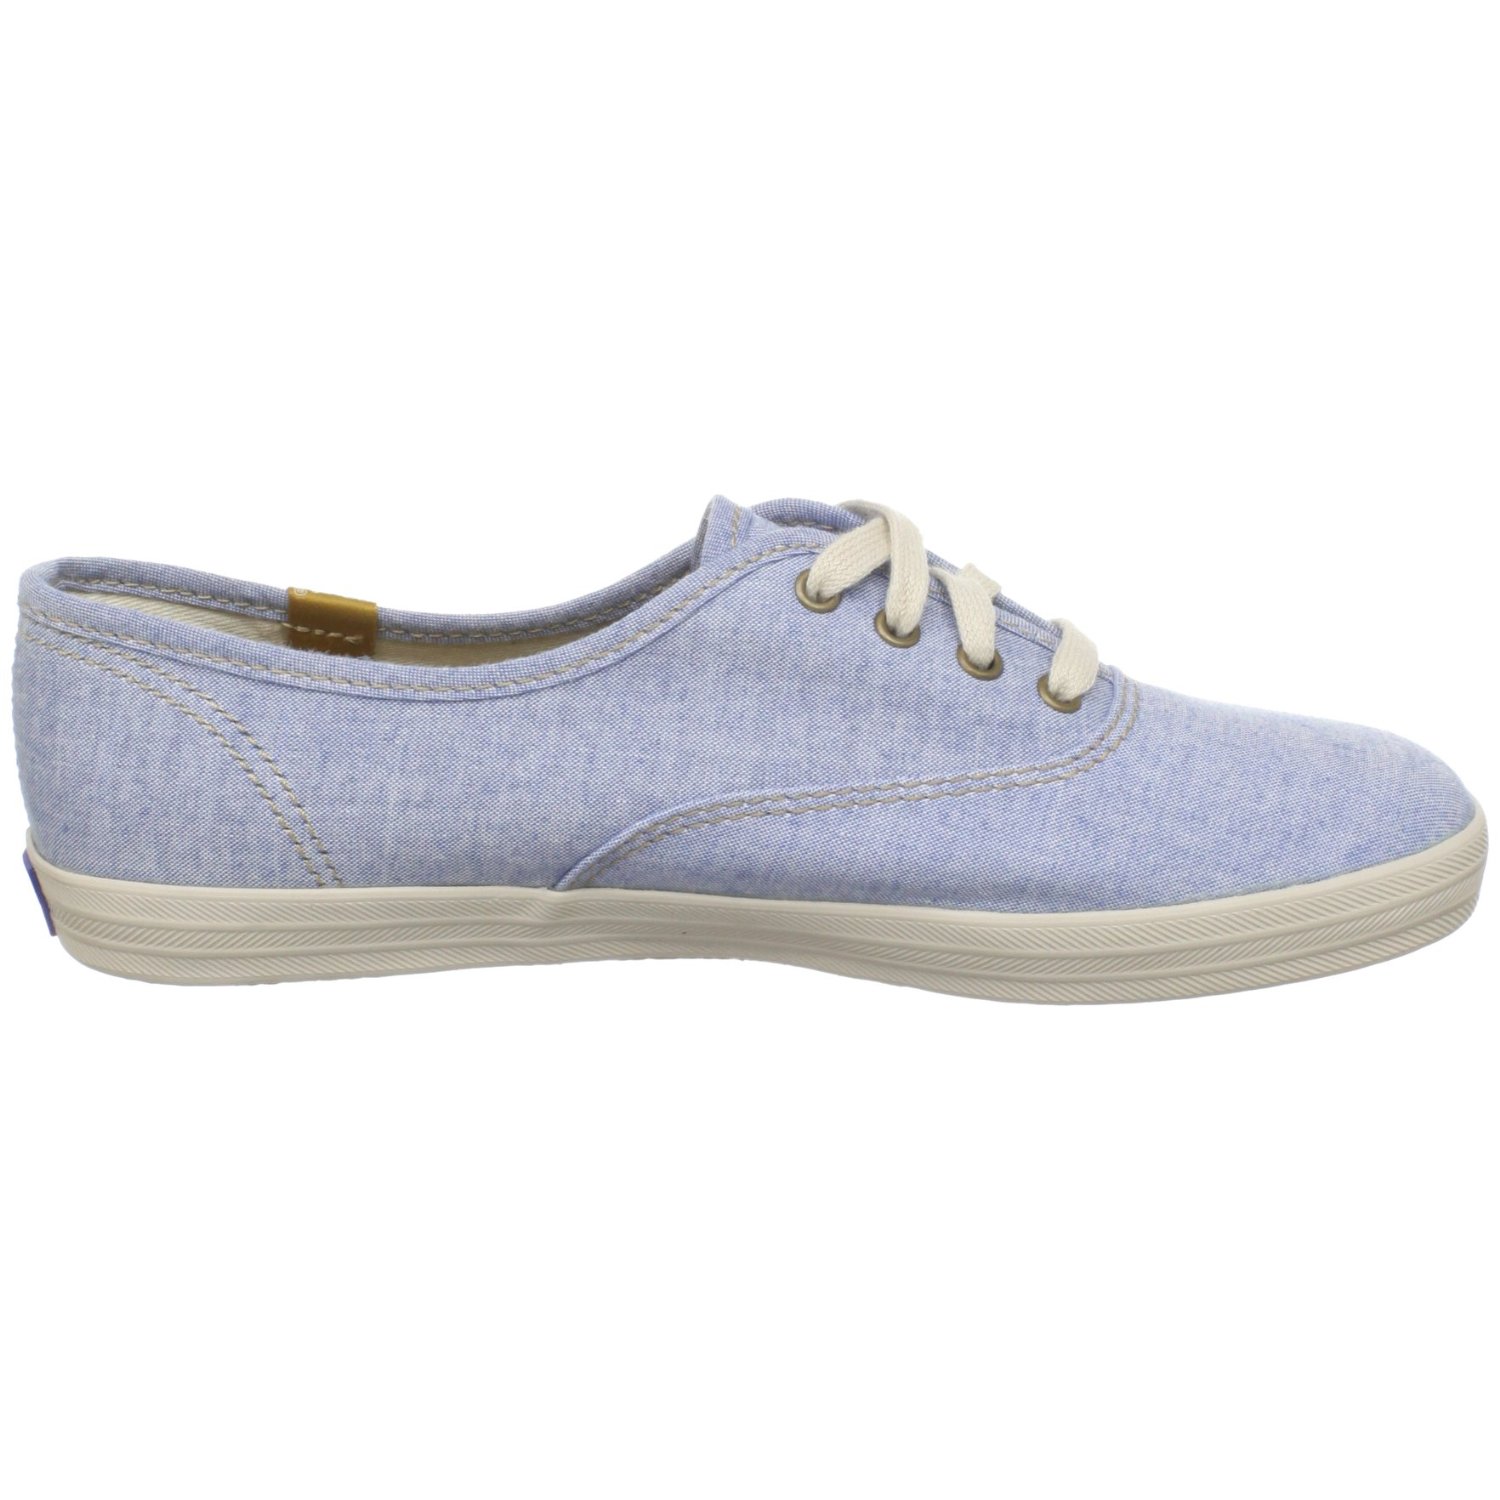 Keds Keds Womens Champion Basic Oxford Laceup Fashion Sneaker in Blue ...